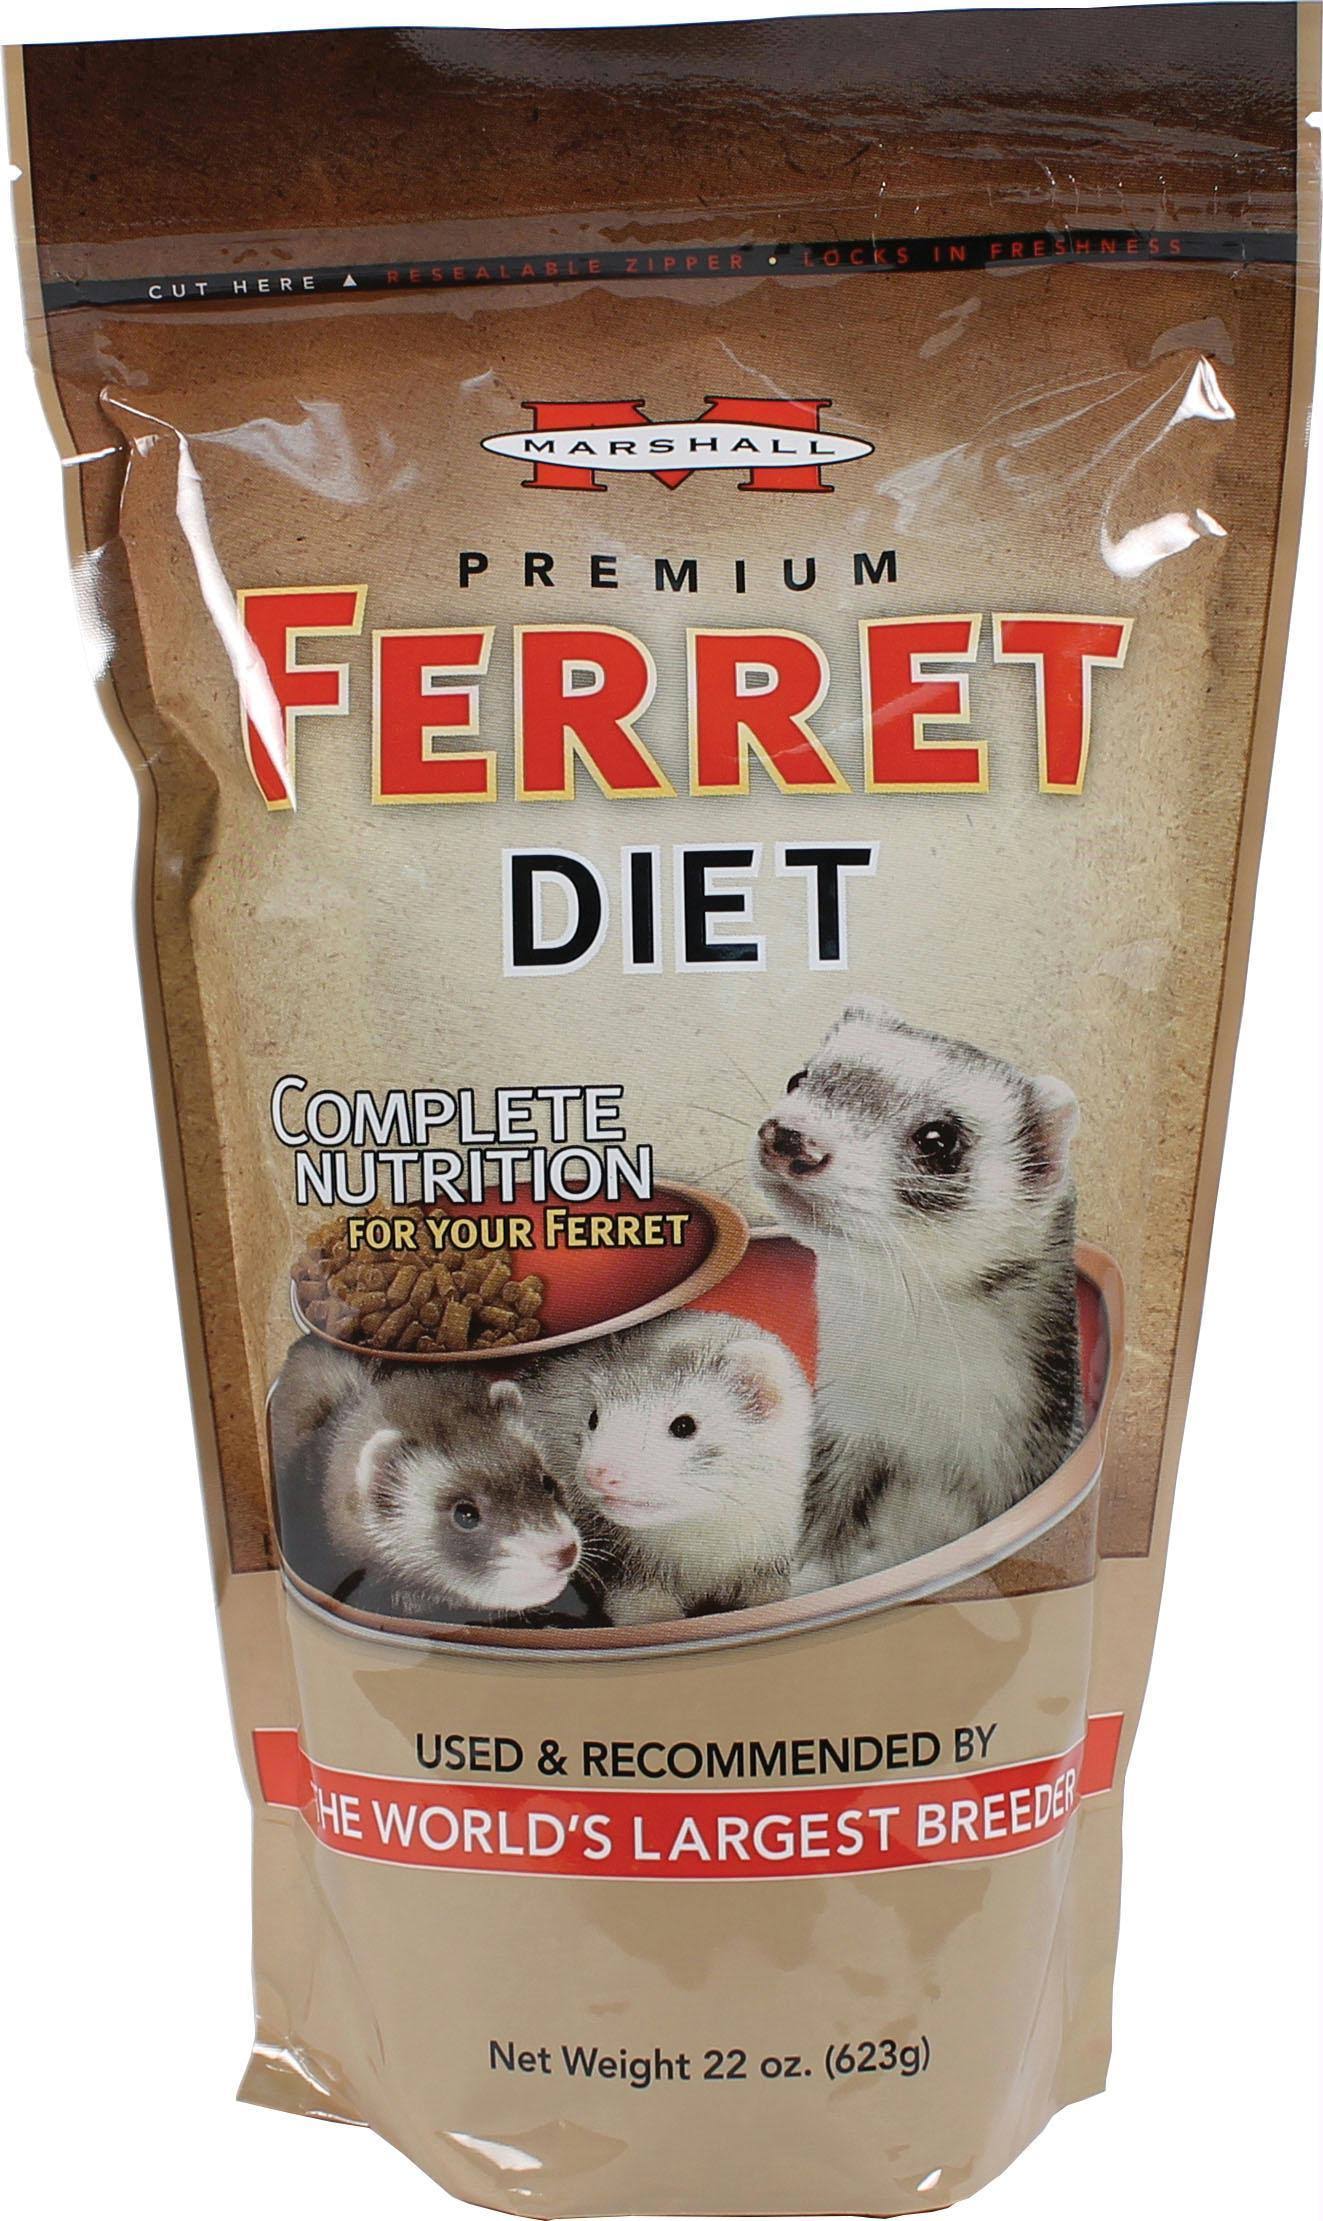 Marshall Pet Products Ferret Diet Food - 623g